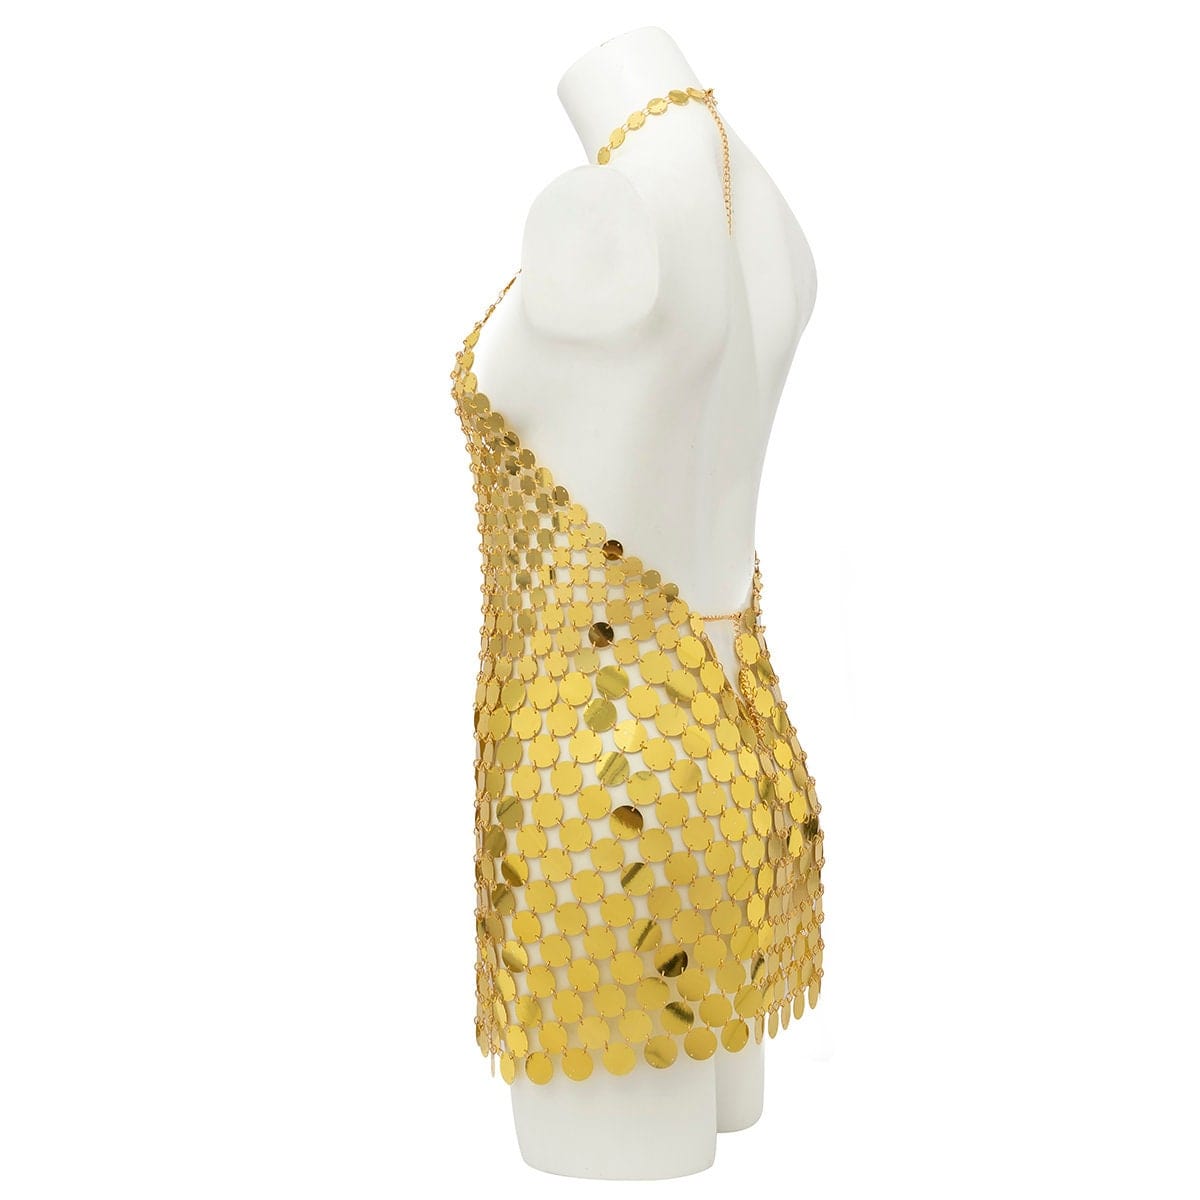 Handmade Gold Silver Tone Glitter Sequins Patchwork Rave Party Mini Dress